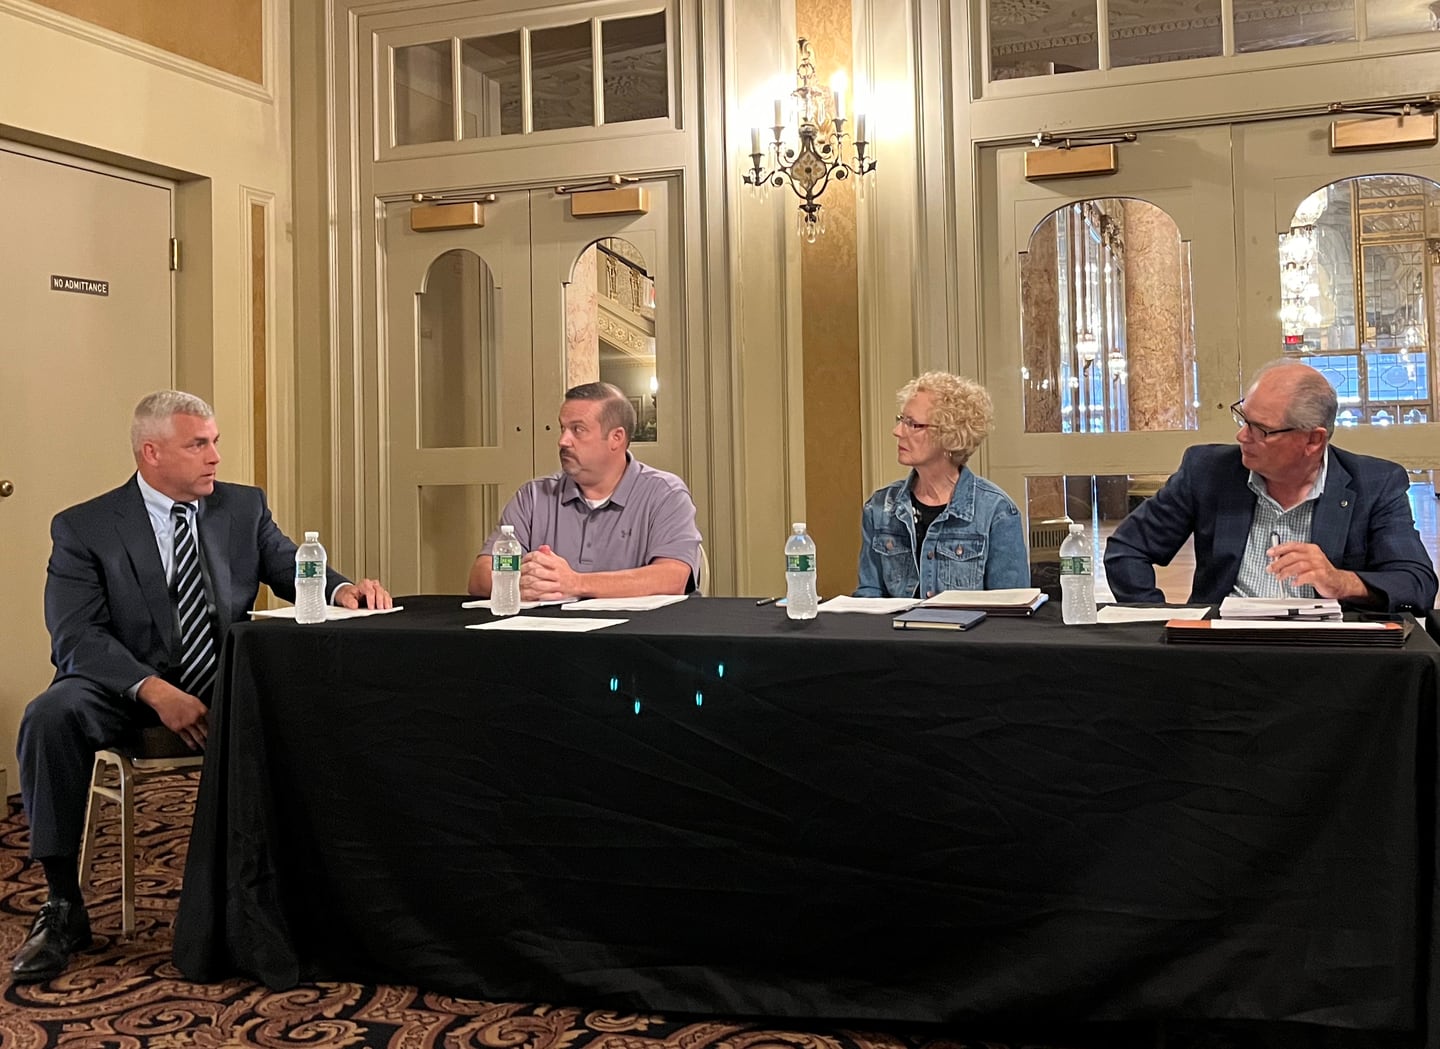 Joliet Mayor Robert O'Dekirk (left) speaks with the Rialto Square Theatre board on Wednesday, Aug. 24, 2022. Seated next to O'Dekirk is board members William Kent, Jane Condon and Board Chairman Robert Filotto.